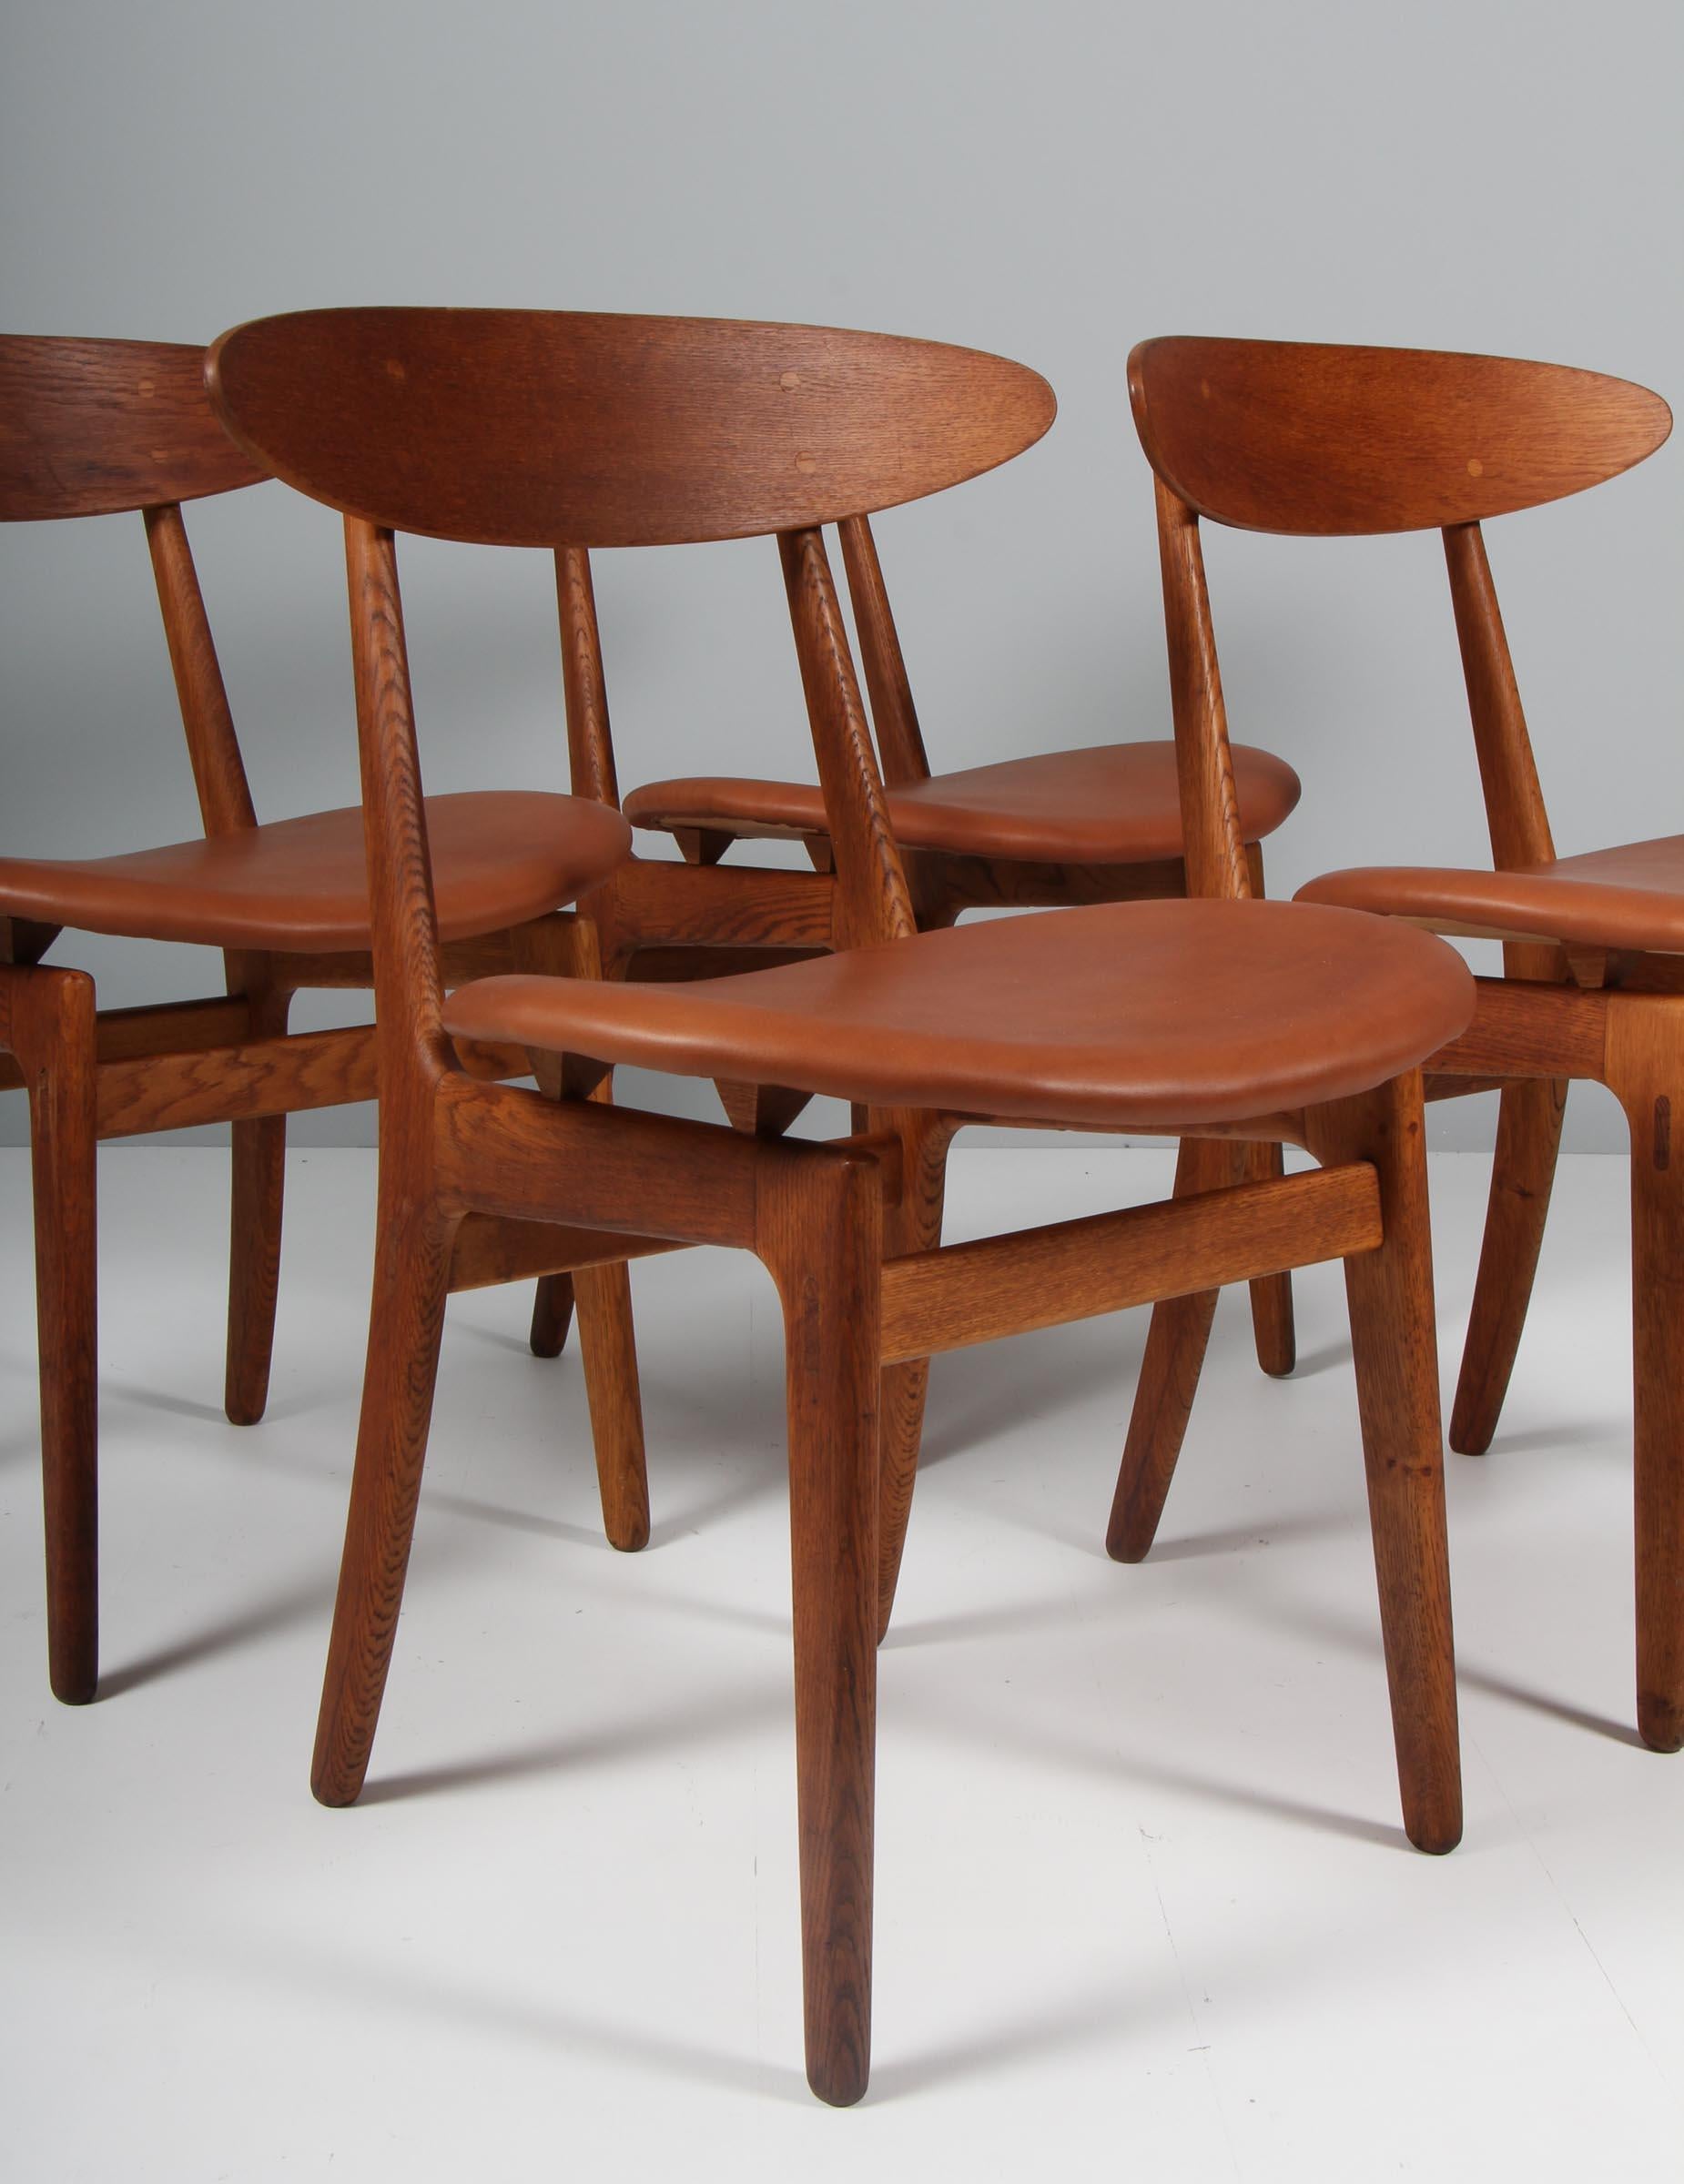 Vilhelm Wohlert Dining Chairs in Oak and Aniline Leather, Denmark, 1960's In Good Condition For Sale In Esbjerg, DK